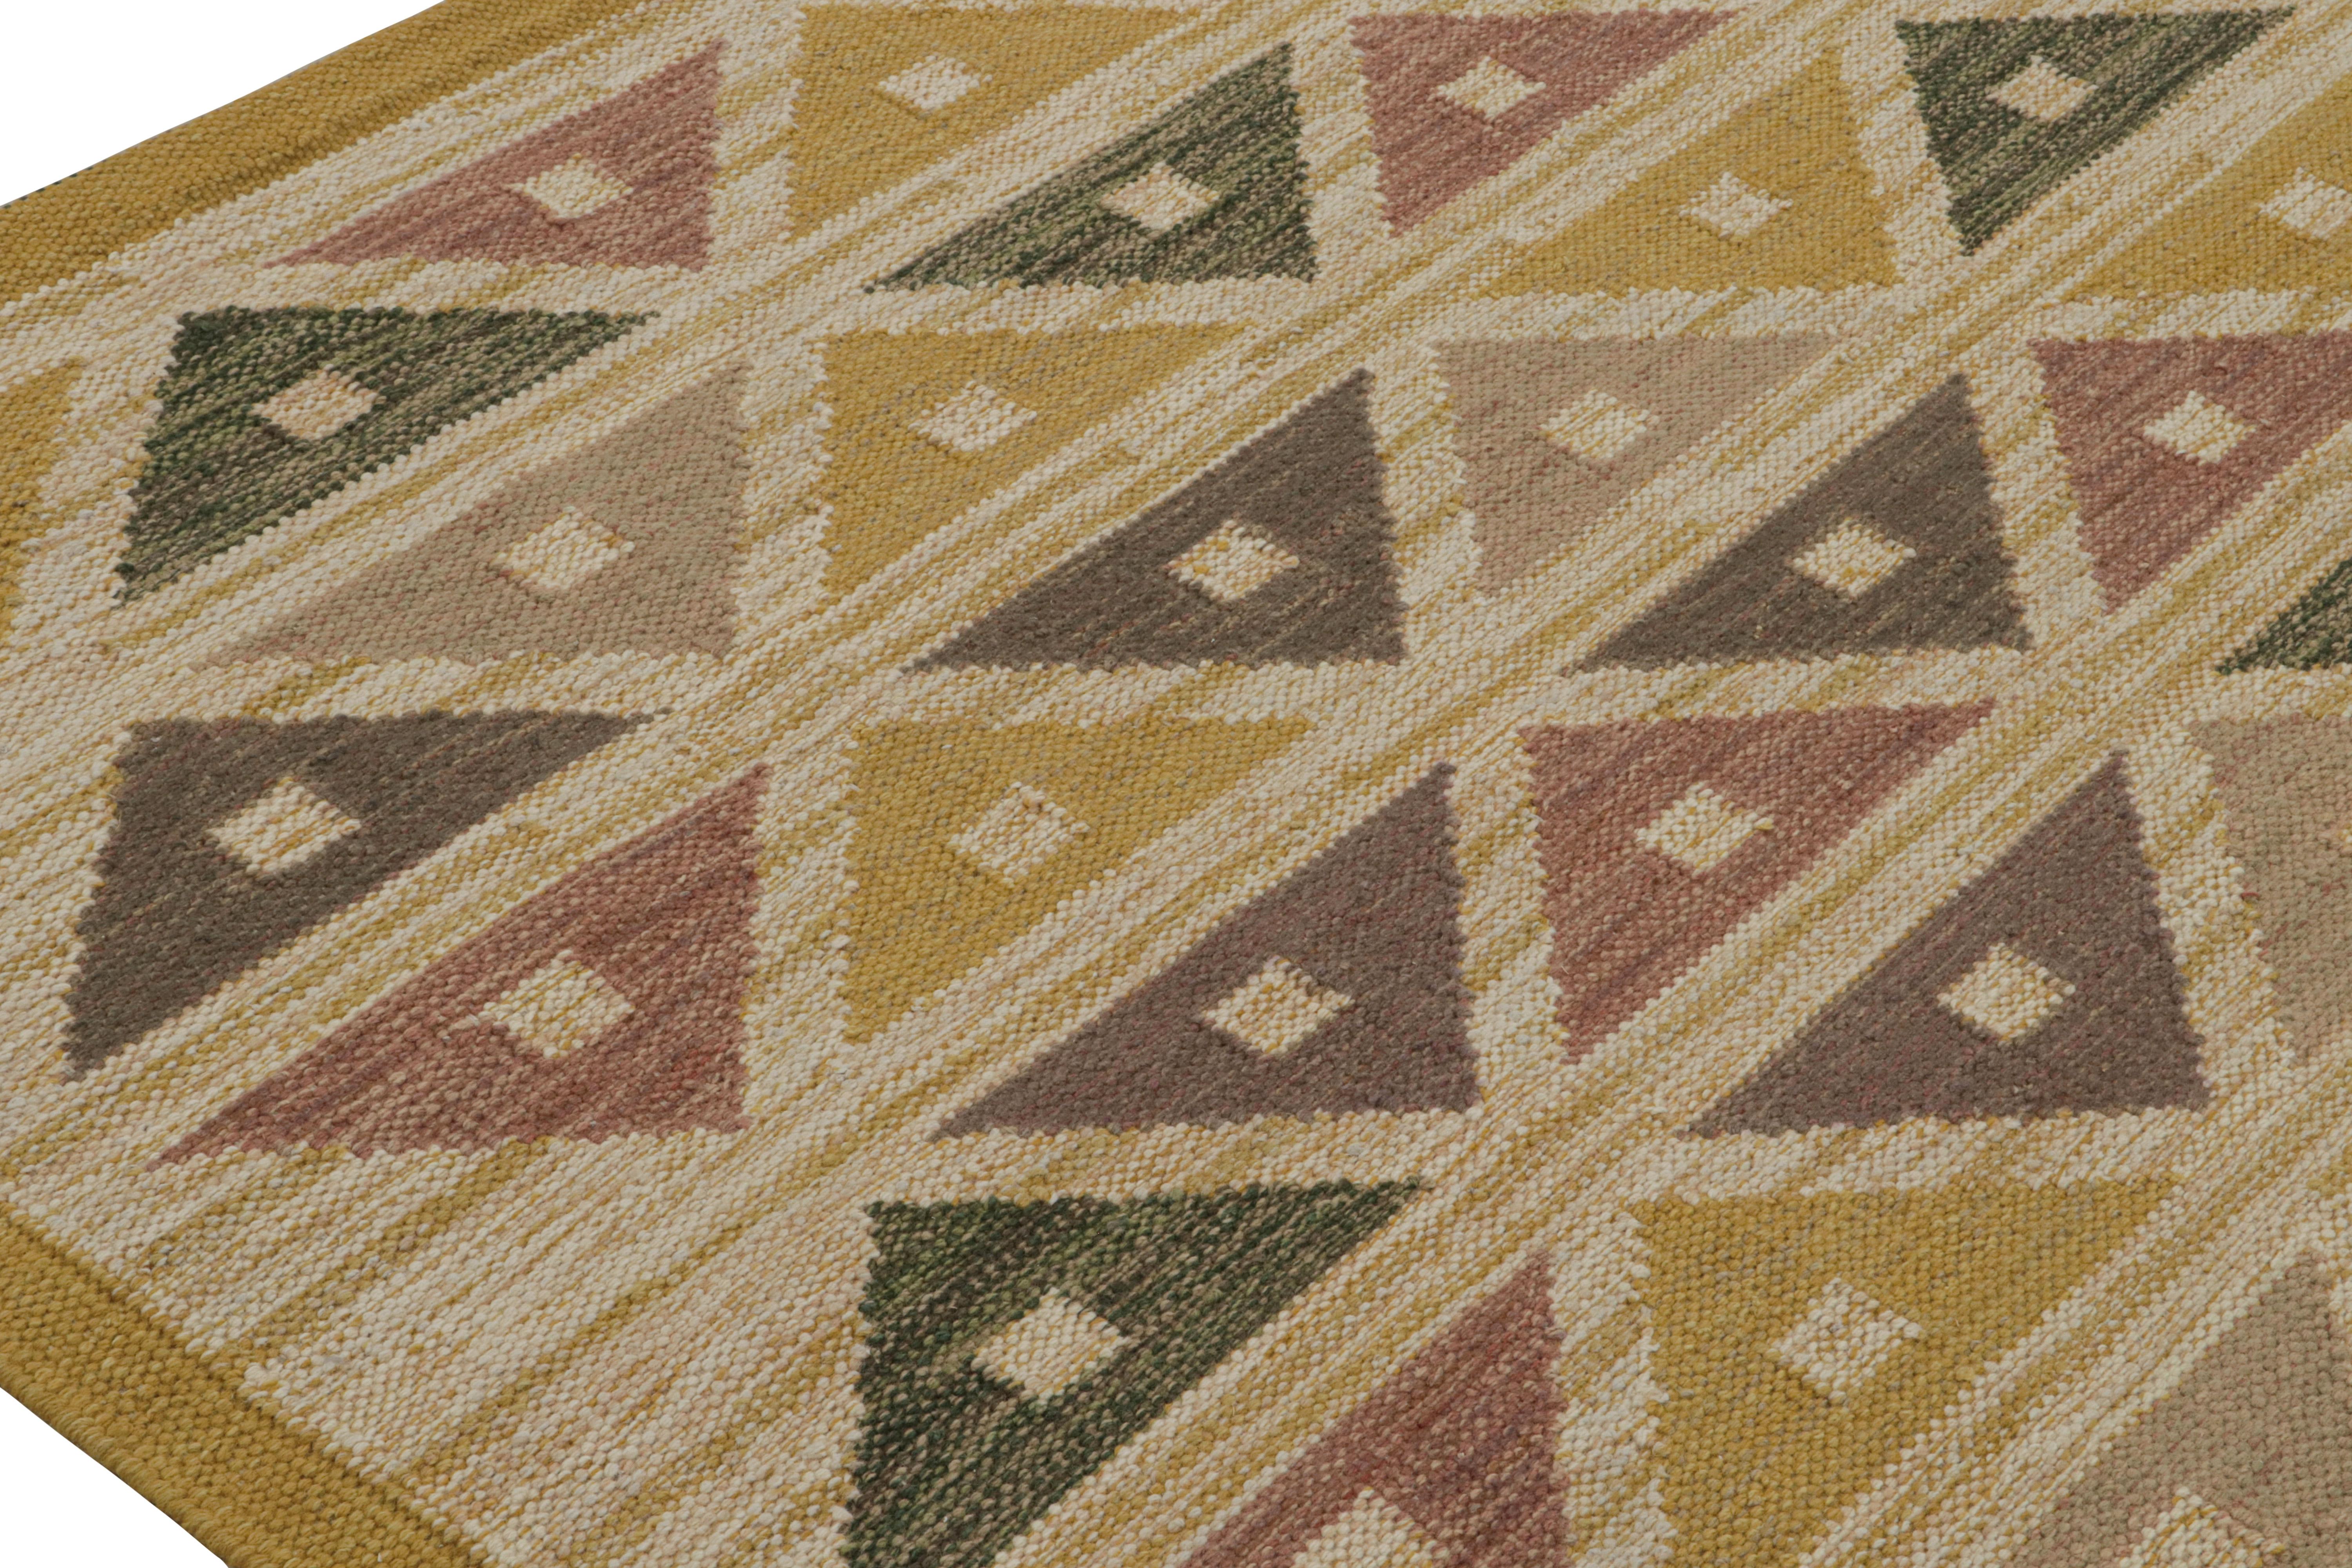 Hand-Woven Rug & Kilim’s Scandinavian style Kilim rug in Gold & Brown Geometric Patterns For Sale